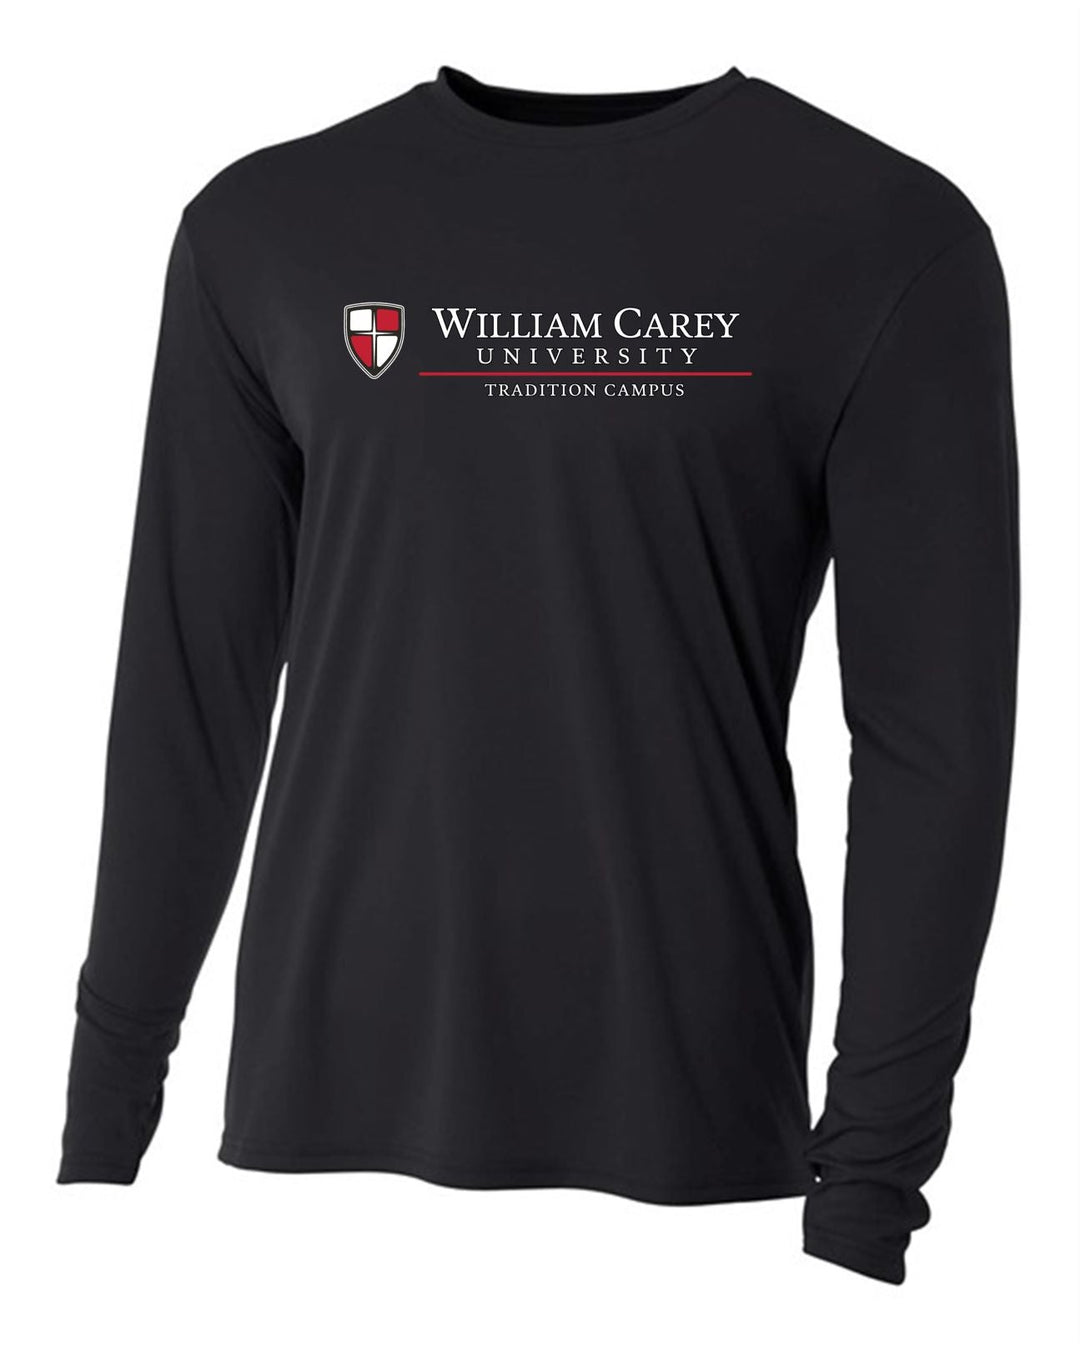 WCU Tradition Campus Youth Long-Sleeve Performance Shirt WCU TC Black Youth Small - Third Coast Soccer